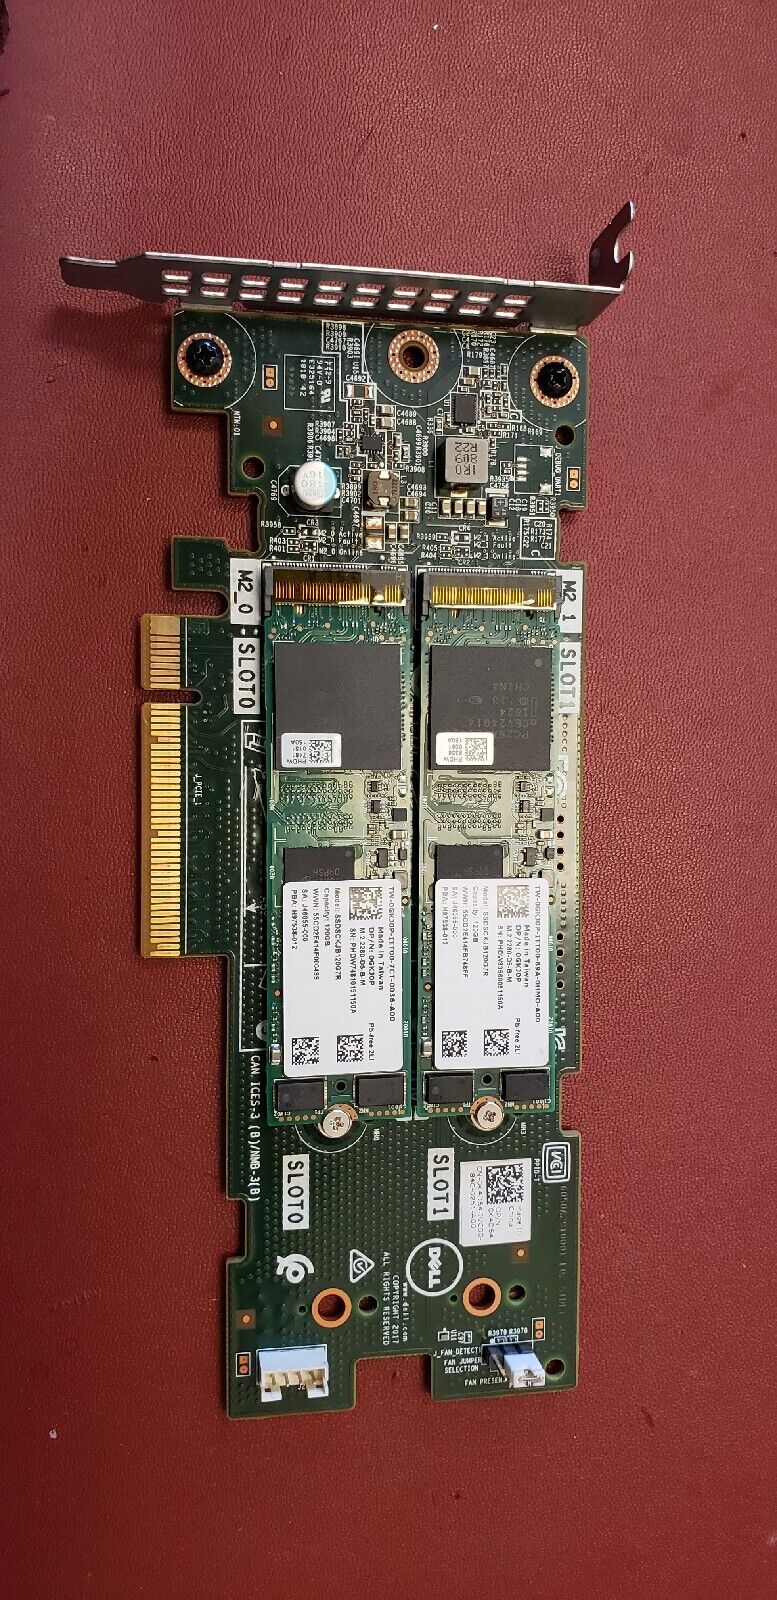 GENUINE Dell PCI 2x M.2 Slots BOSS-S1 Storage Adapter K4D64 WITH 2 X 120GB SSD